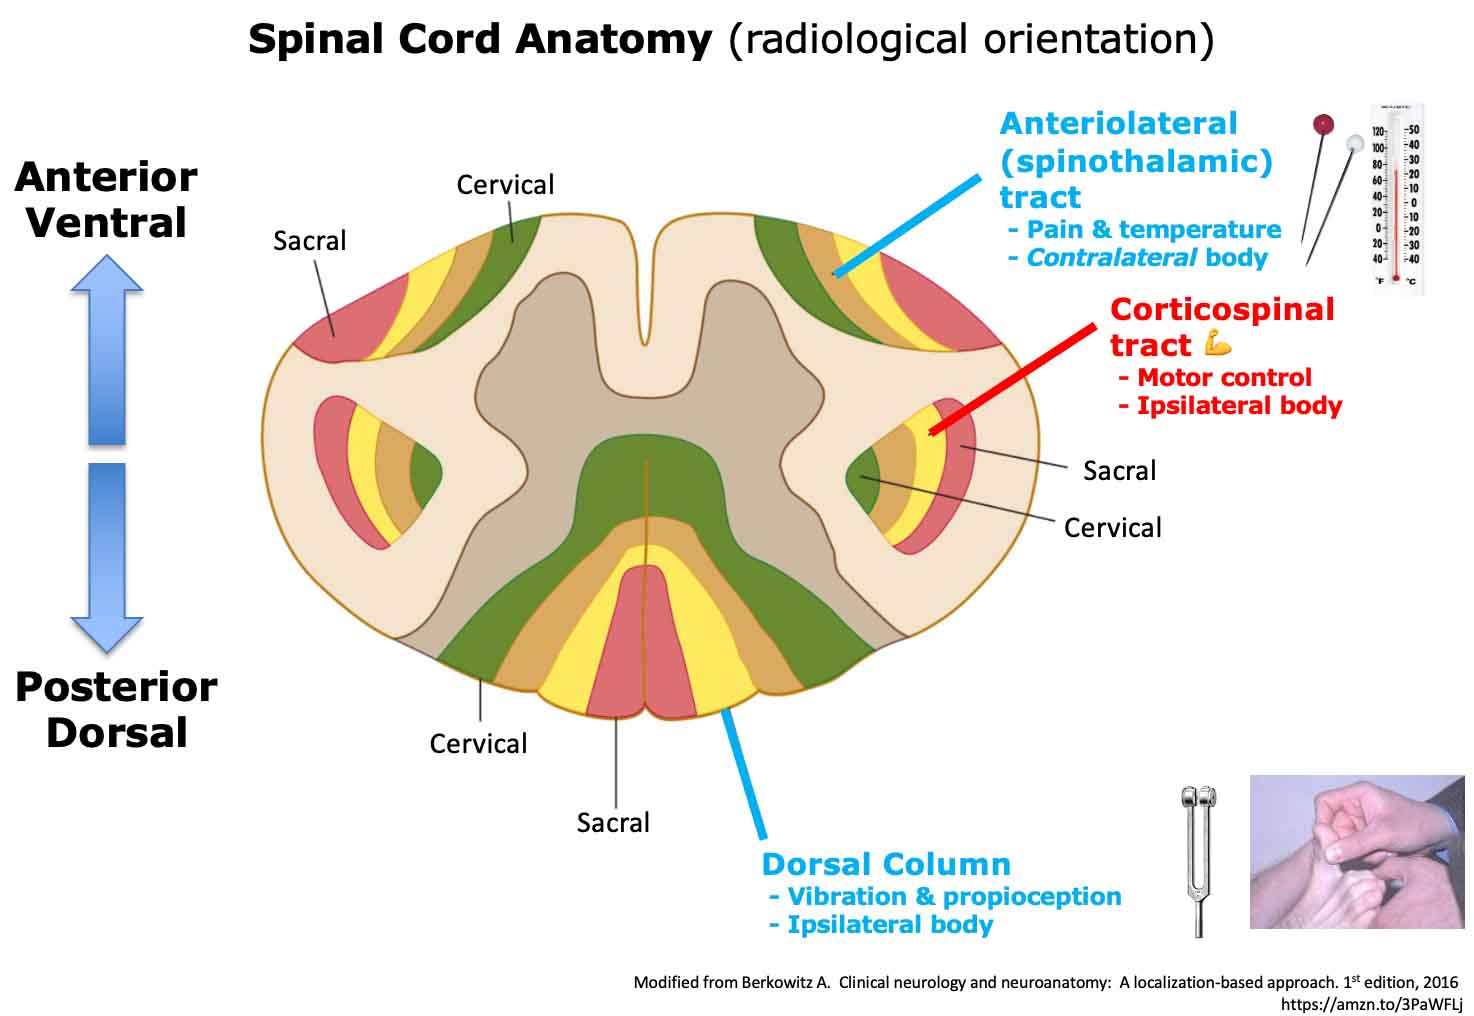 incomplete spinal cord syndromes